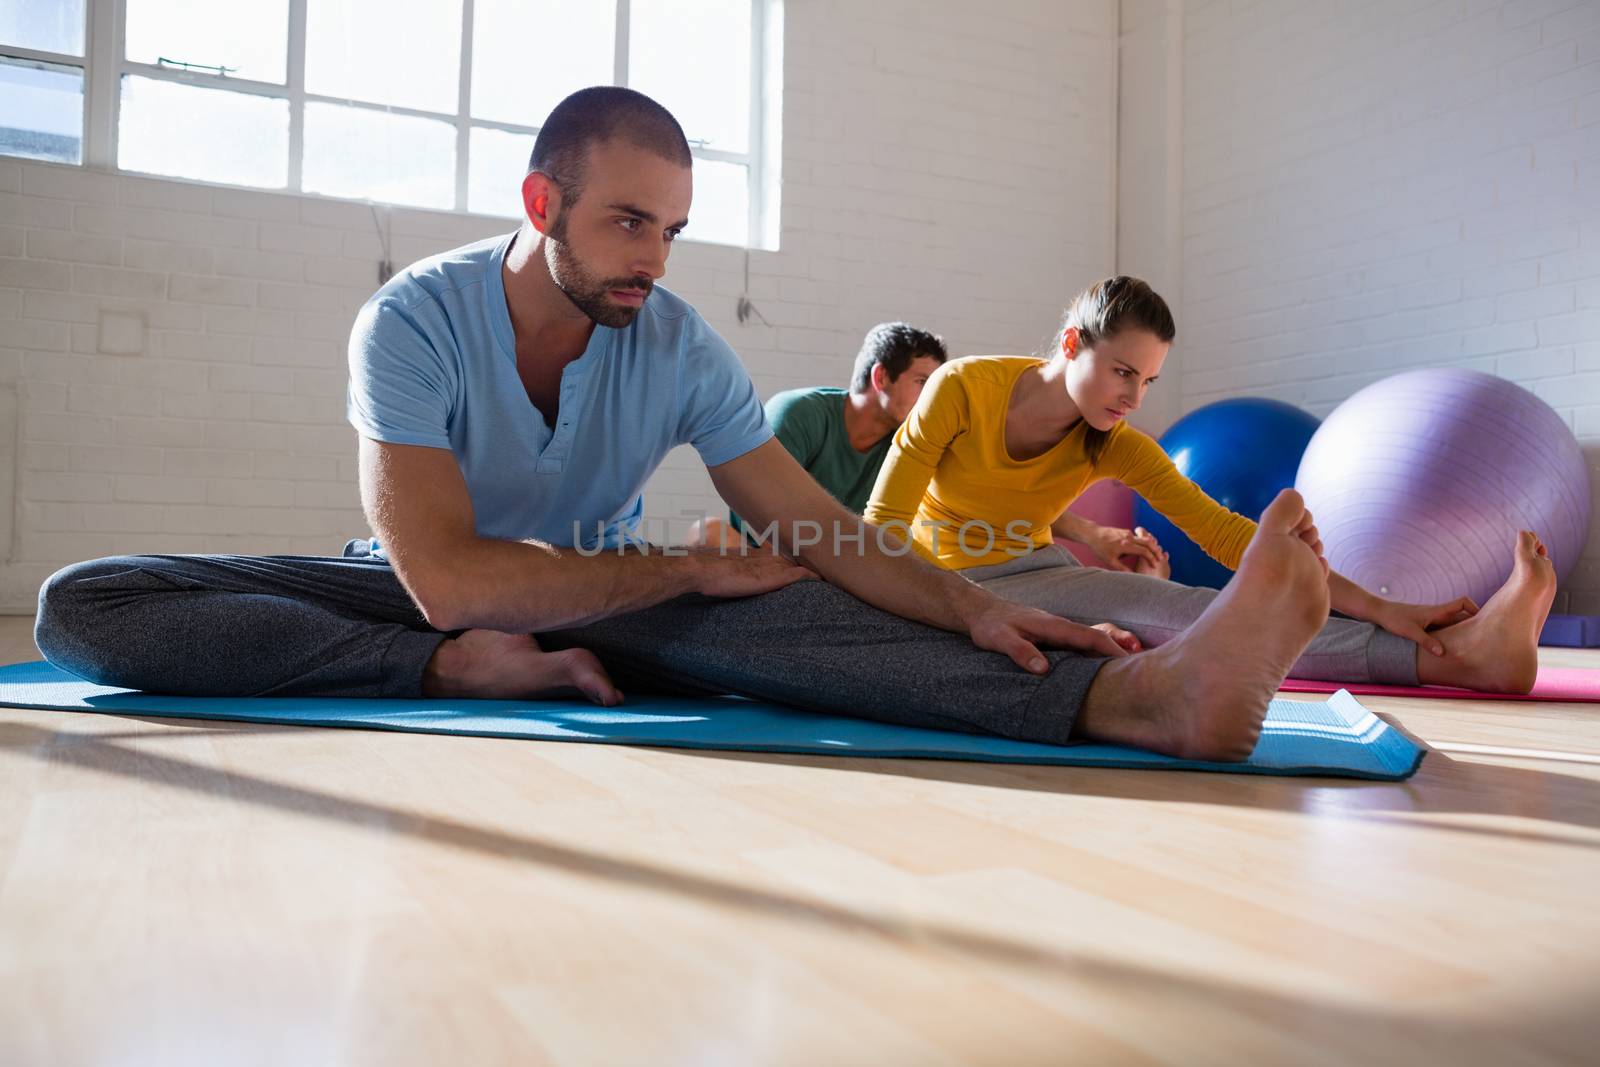 Yoga instructor with students stretching legs at health club